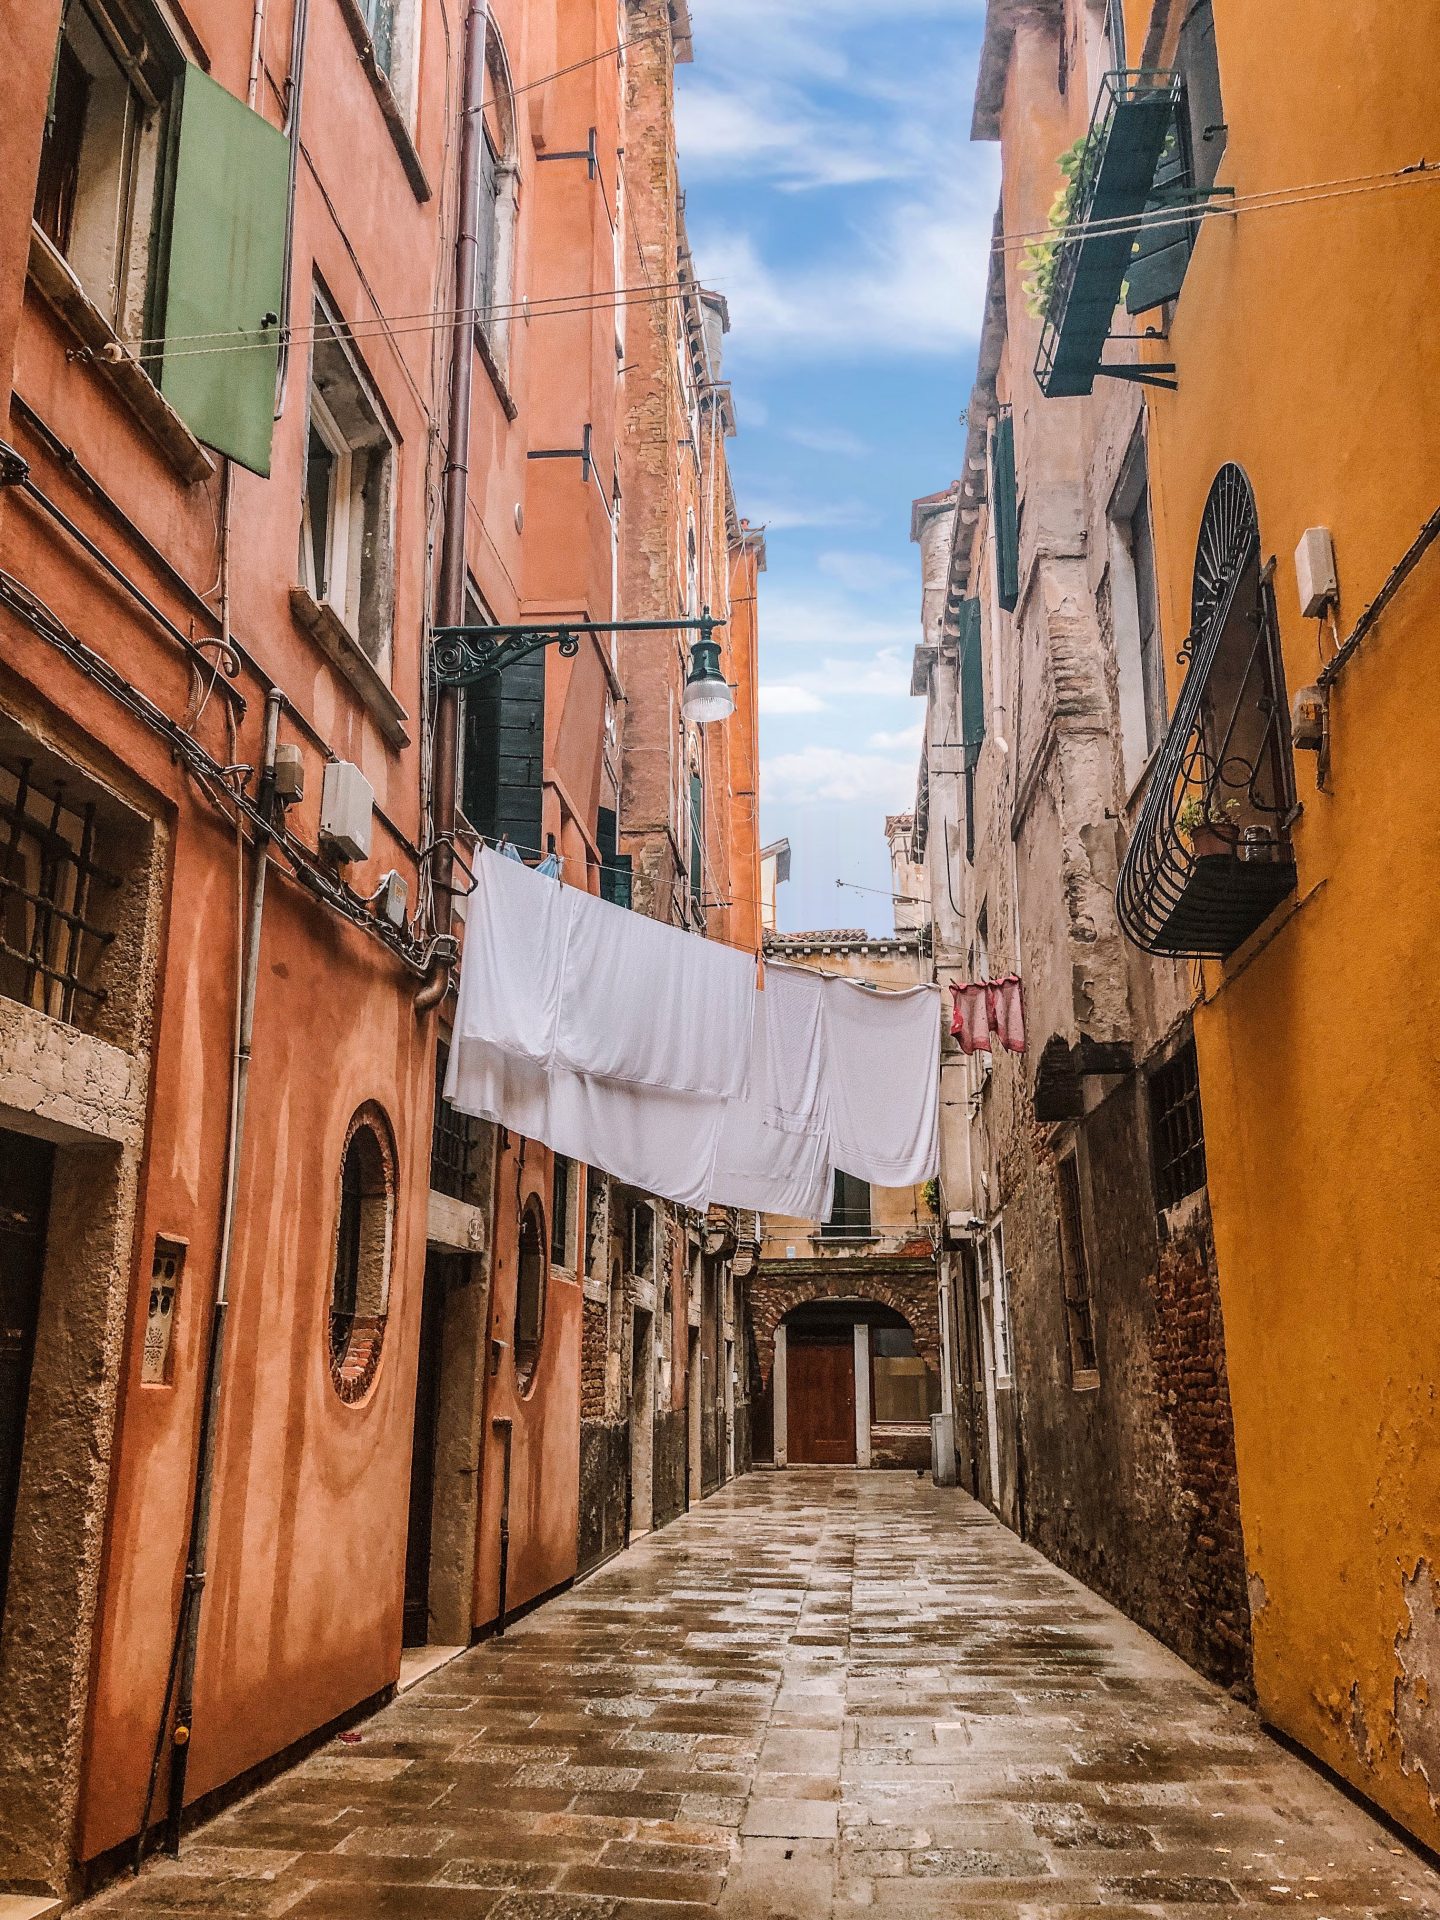 Laundry hanging over the street in Venice, Italy